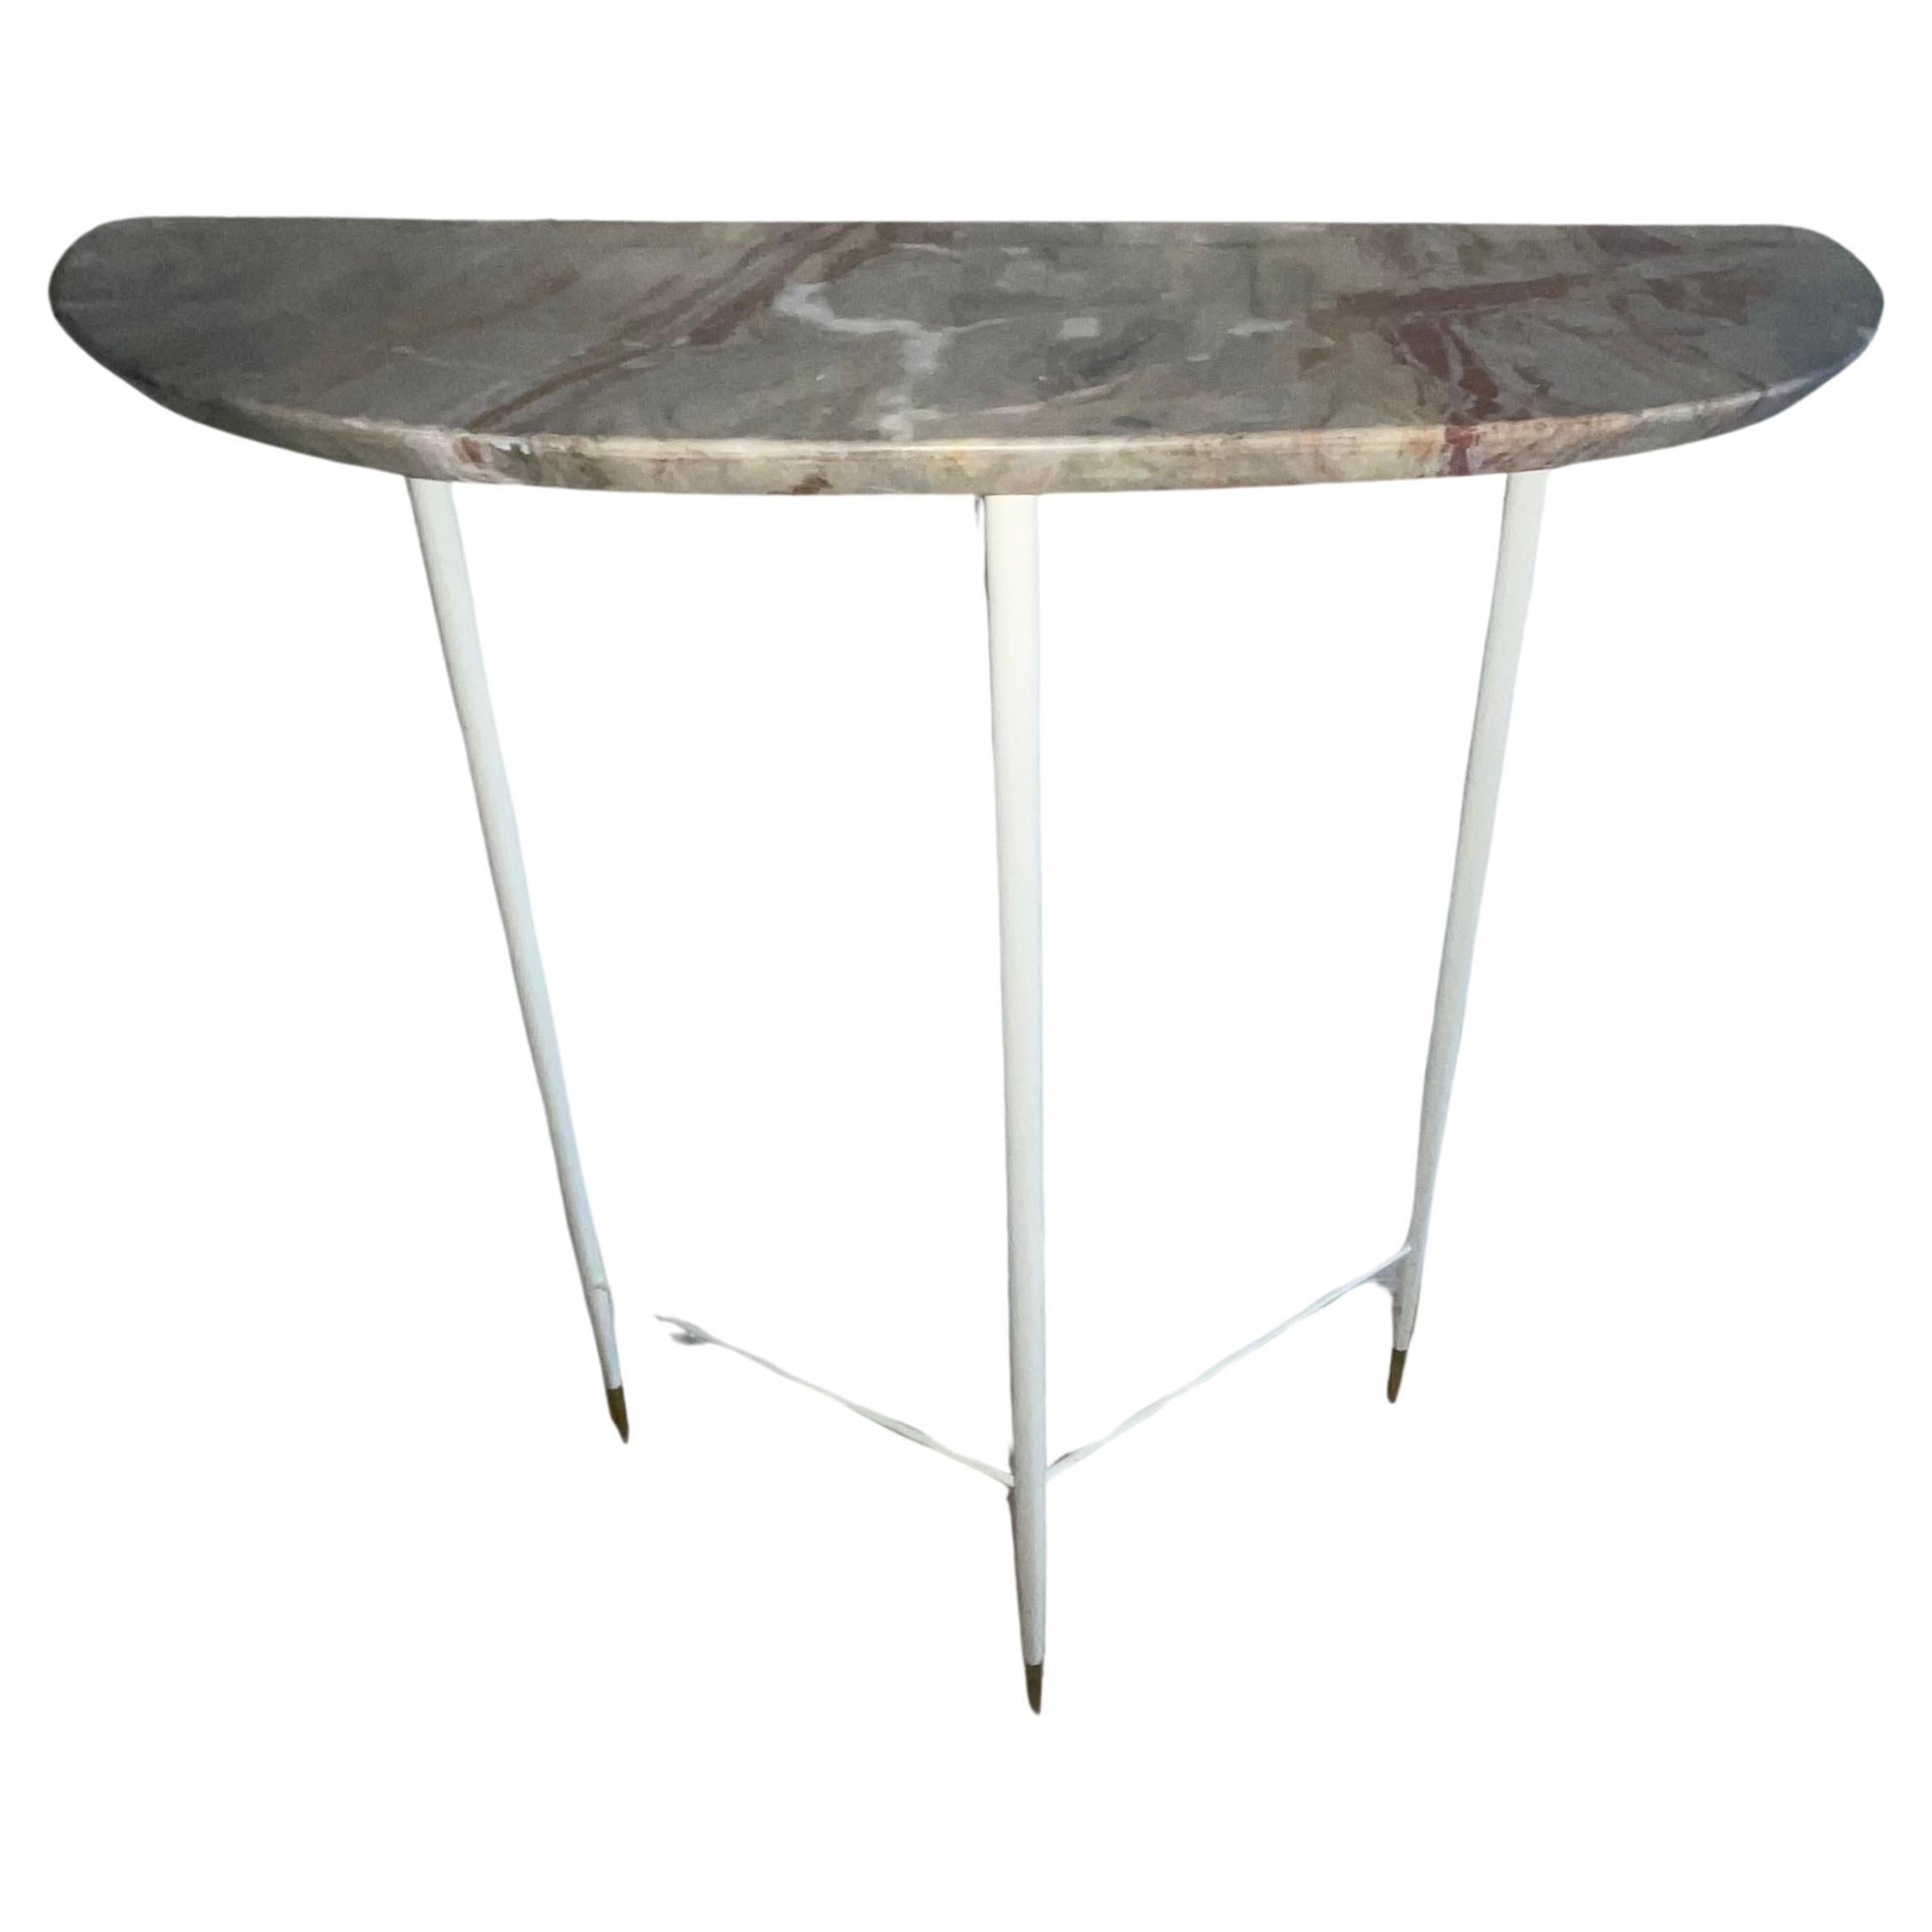 Caesar LACCA - Console 1950s - marble - iron - brass ferrules. For Sale